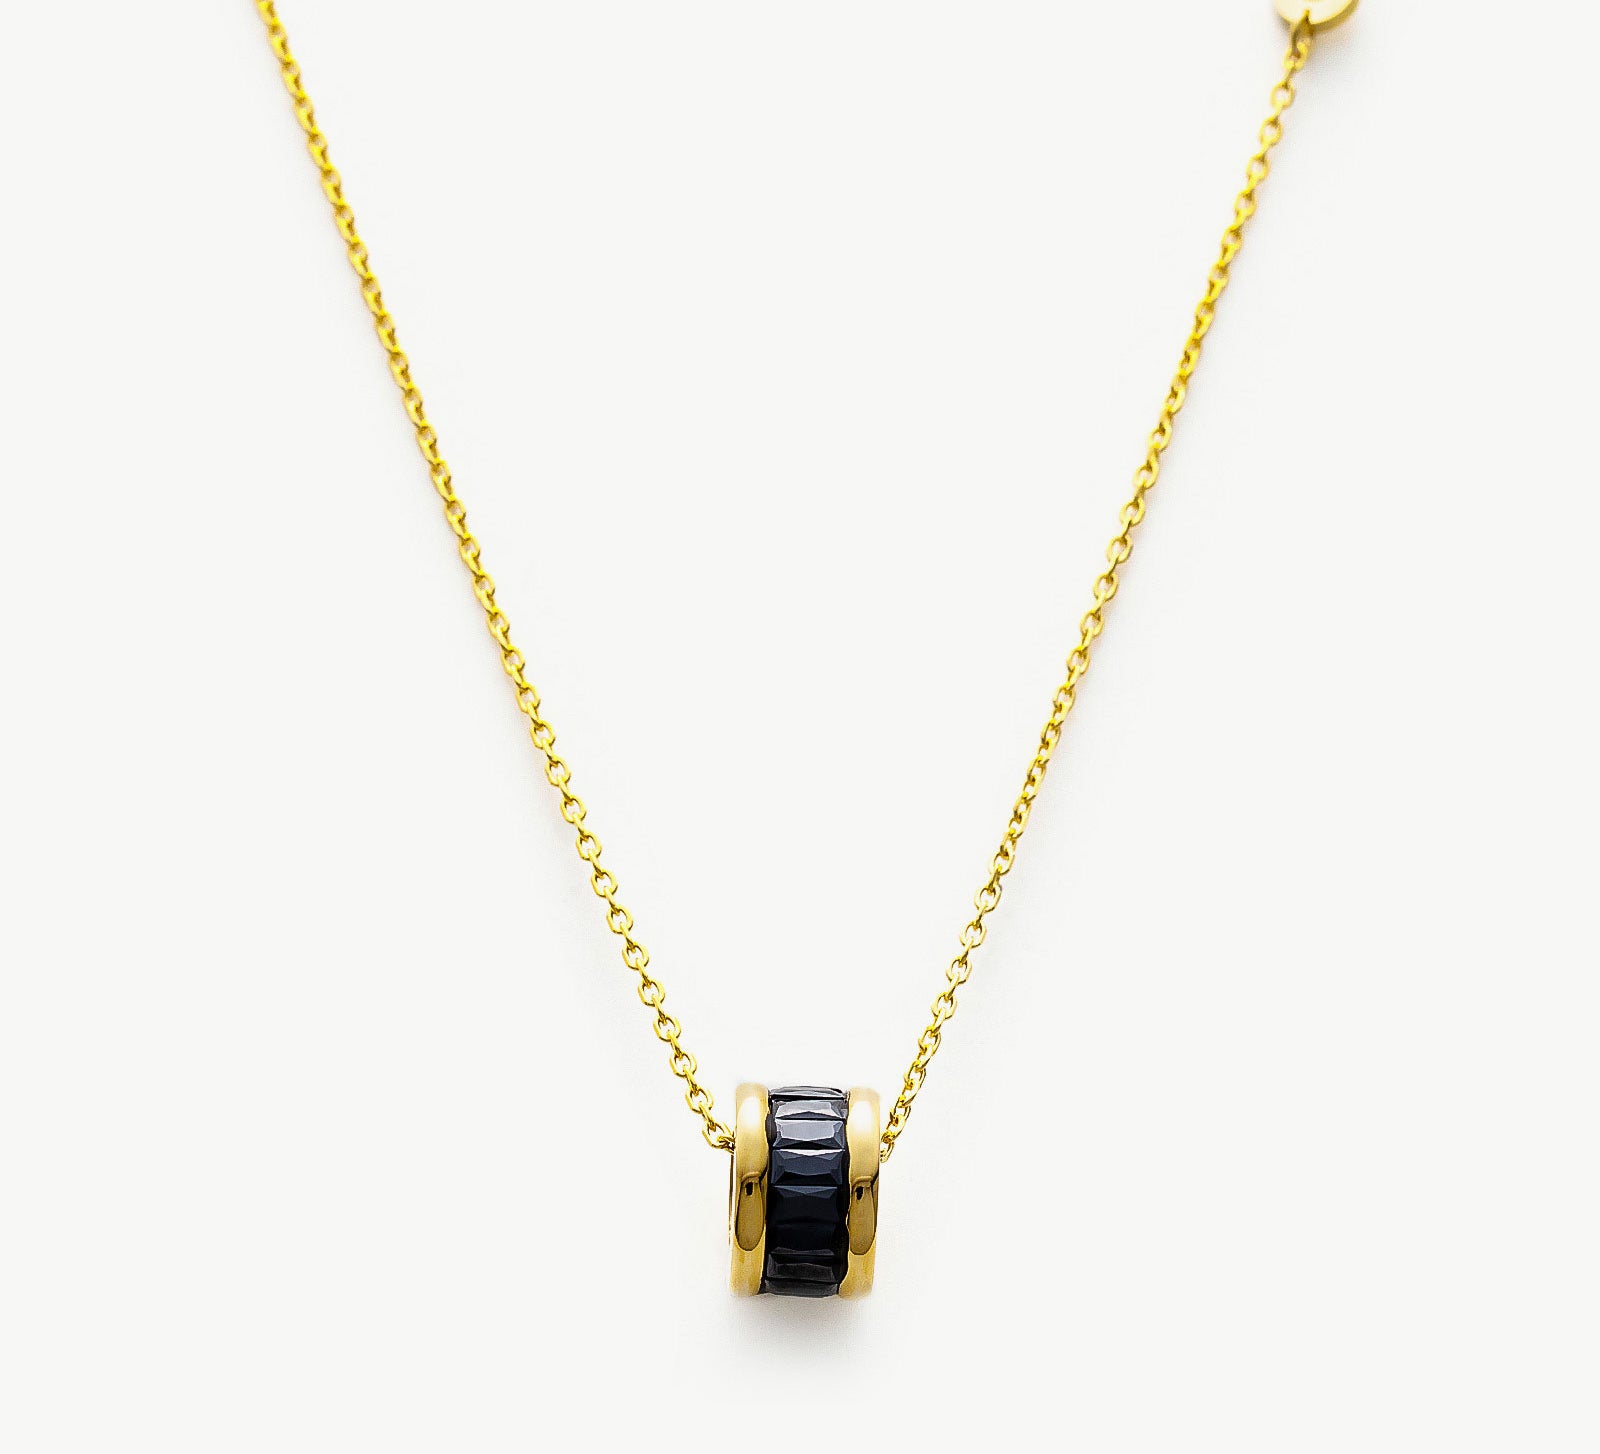  Black Ring Pendant Chain Necklace, a chic and versatile piece with a bold contrast, featuring a black ring pendant suspended from a delicate chain, adding a touch of modern sophistication to your neckline